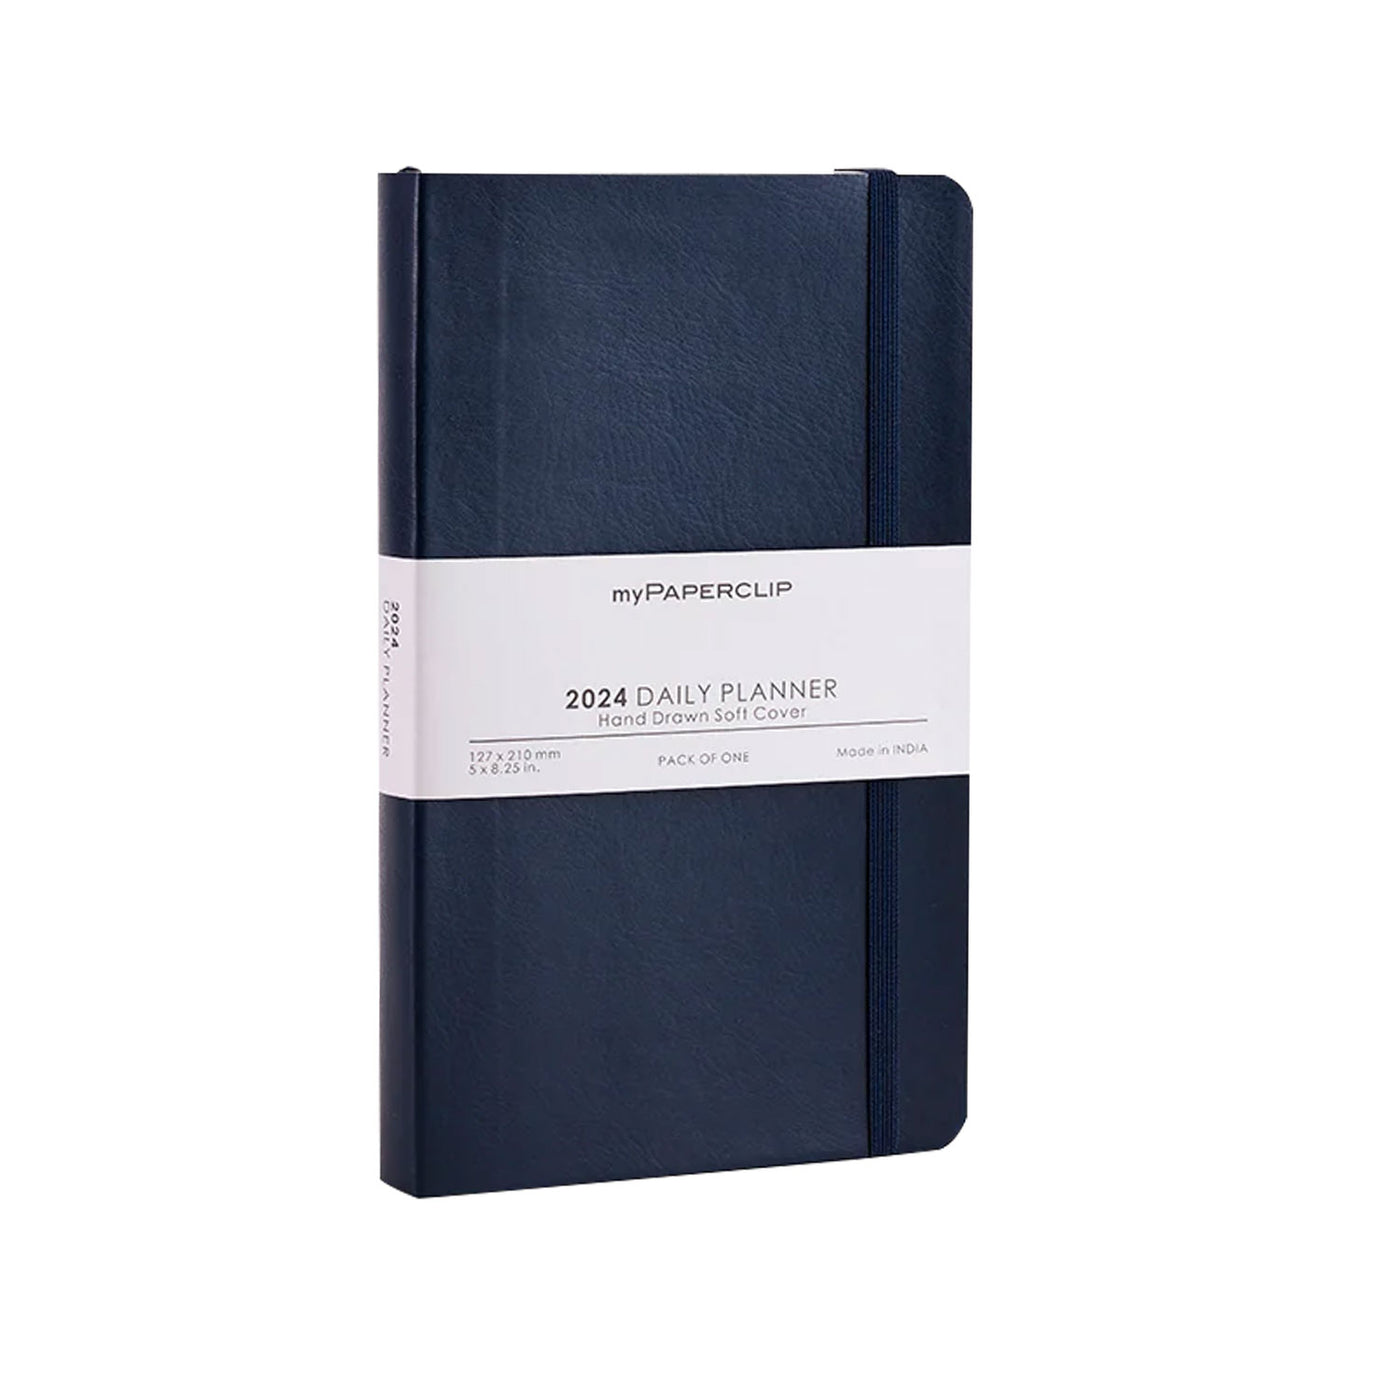 myPAPERCLIP M2 2024 Daily Planner - Blue